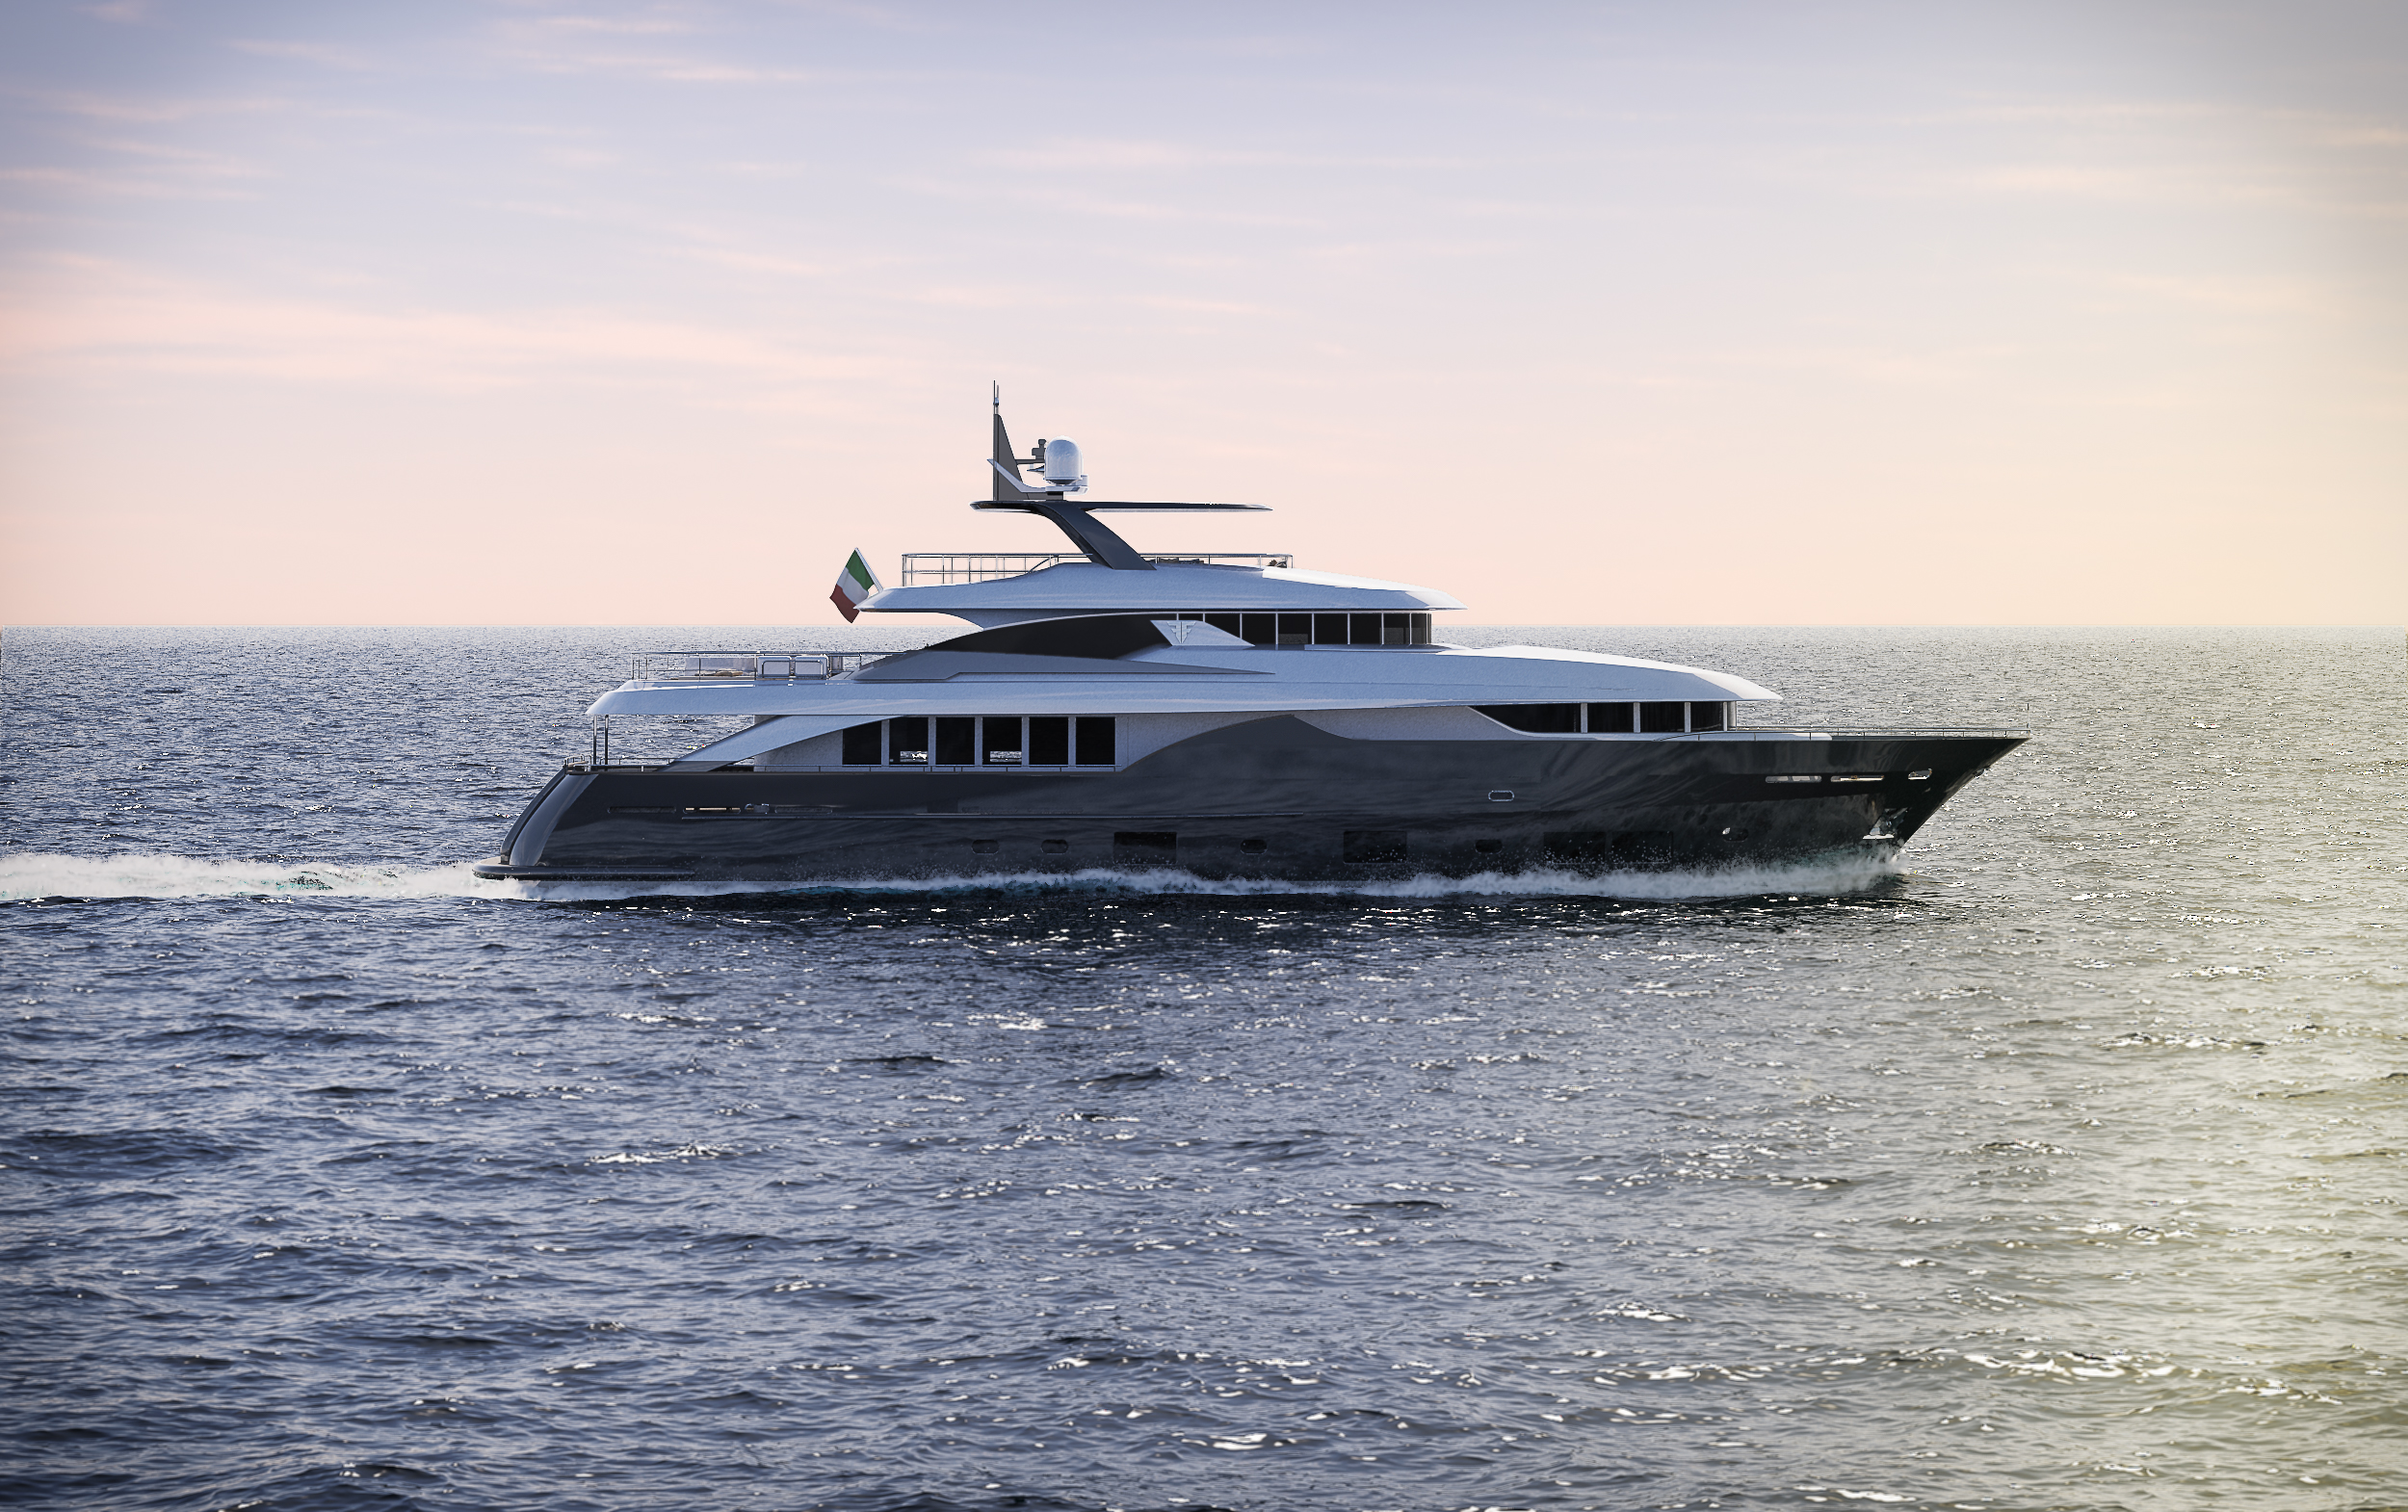 Filippetti Navetta 35M specs with detailed specification and builder summary